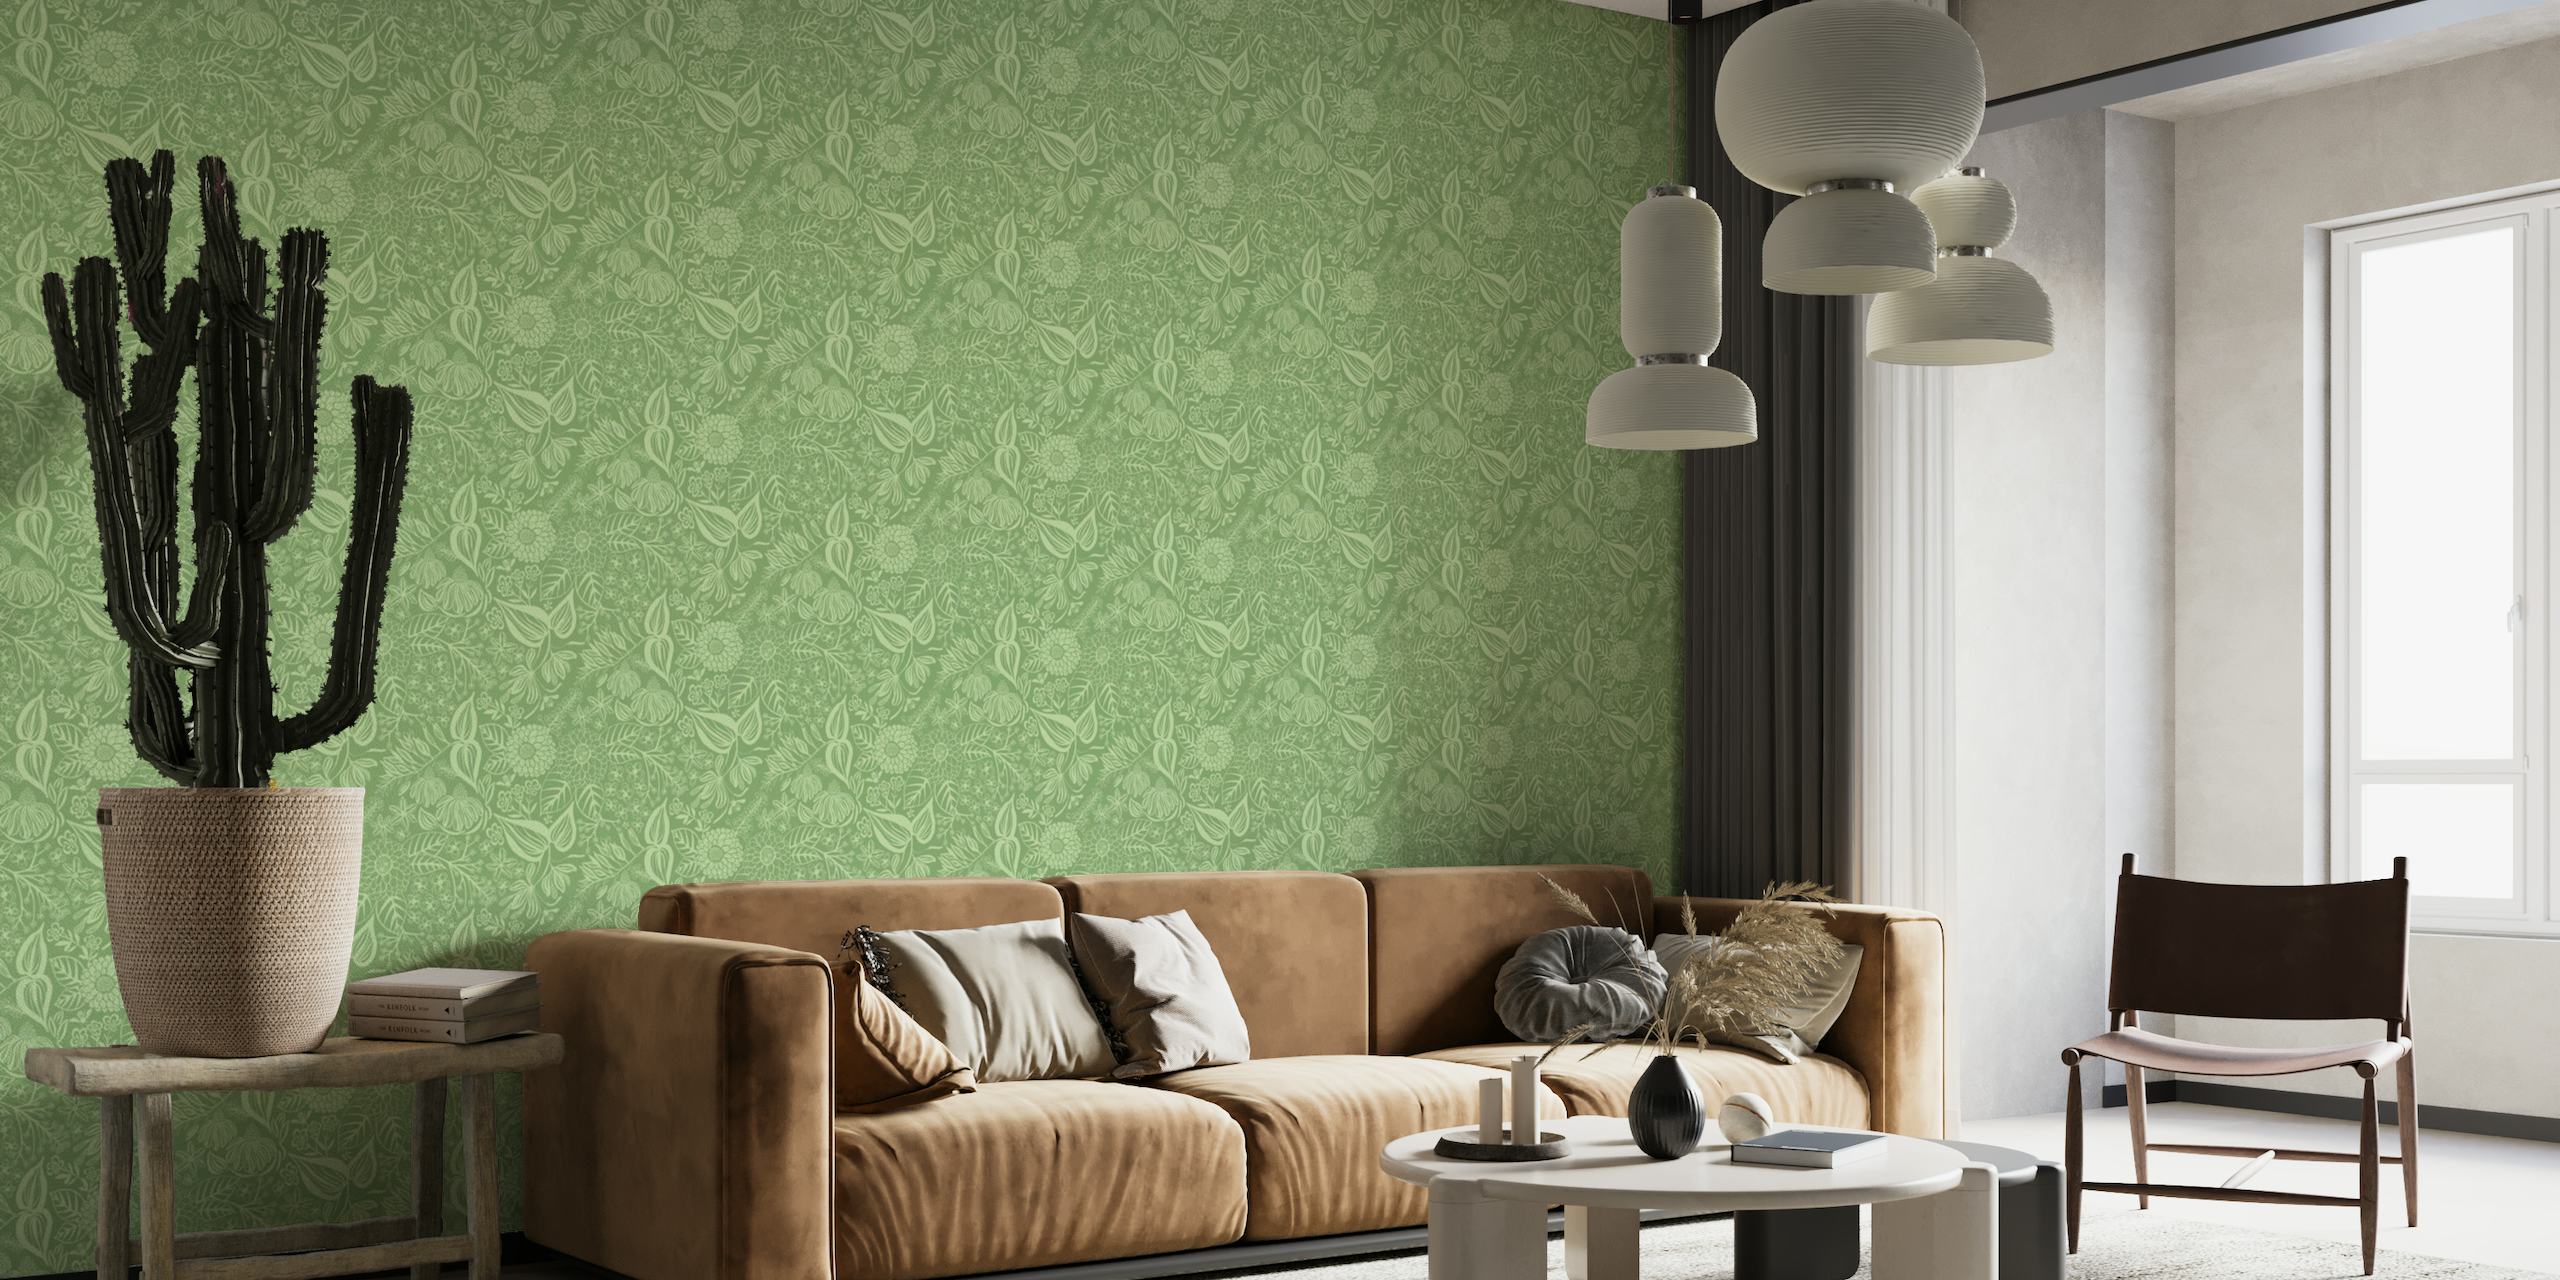 Soft green wall mural with a floral and bee garden pattern